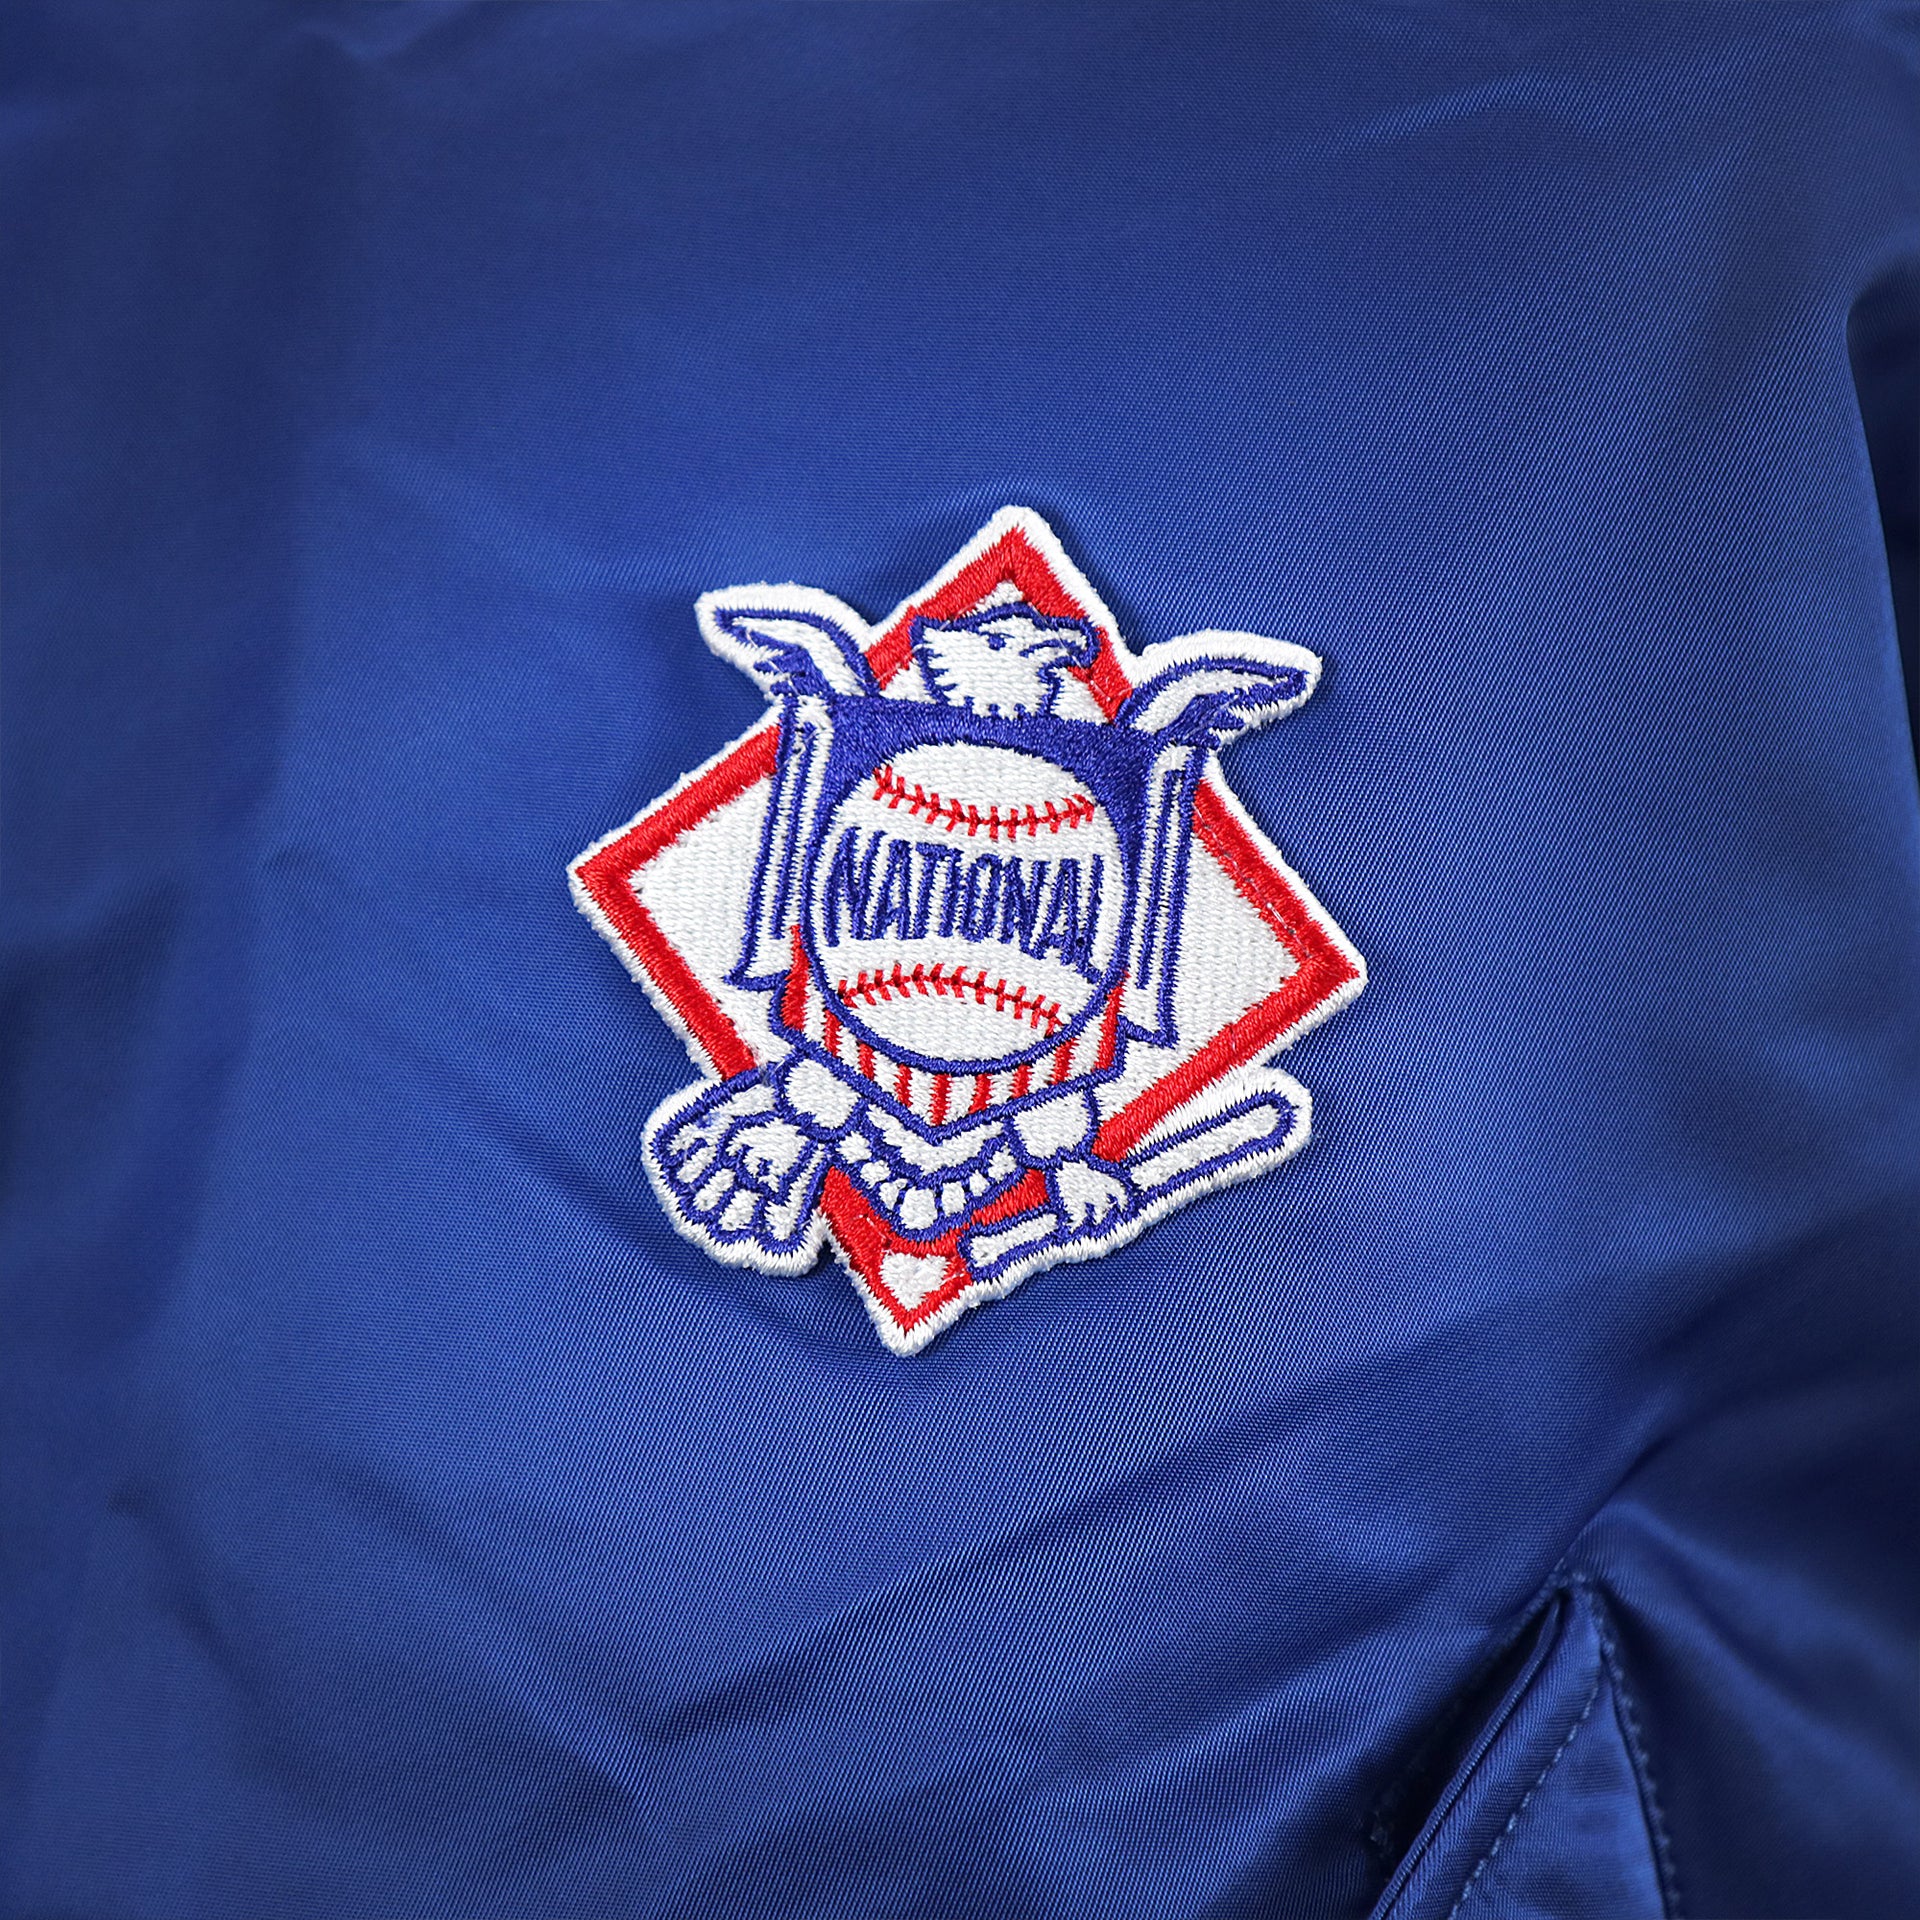 The National Baseball League Side Patch on the New York Mets MLB Patch Alpha Industries Reversible Bomber Jacket With Camo Liner | Royal Blue Bomber Jacket